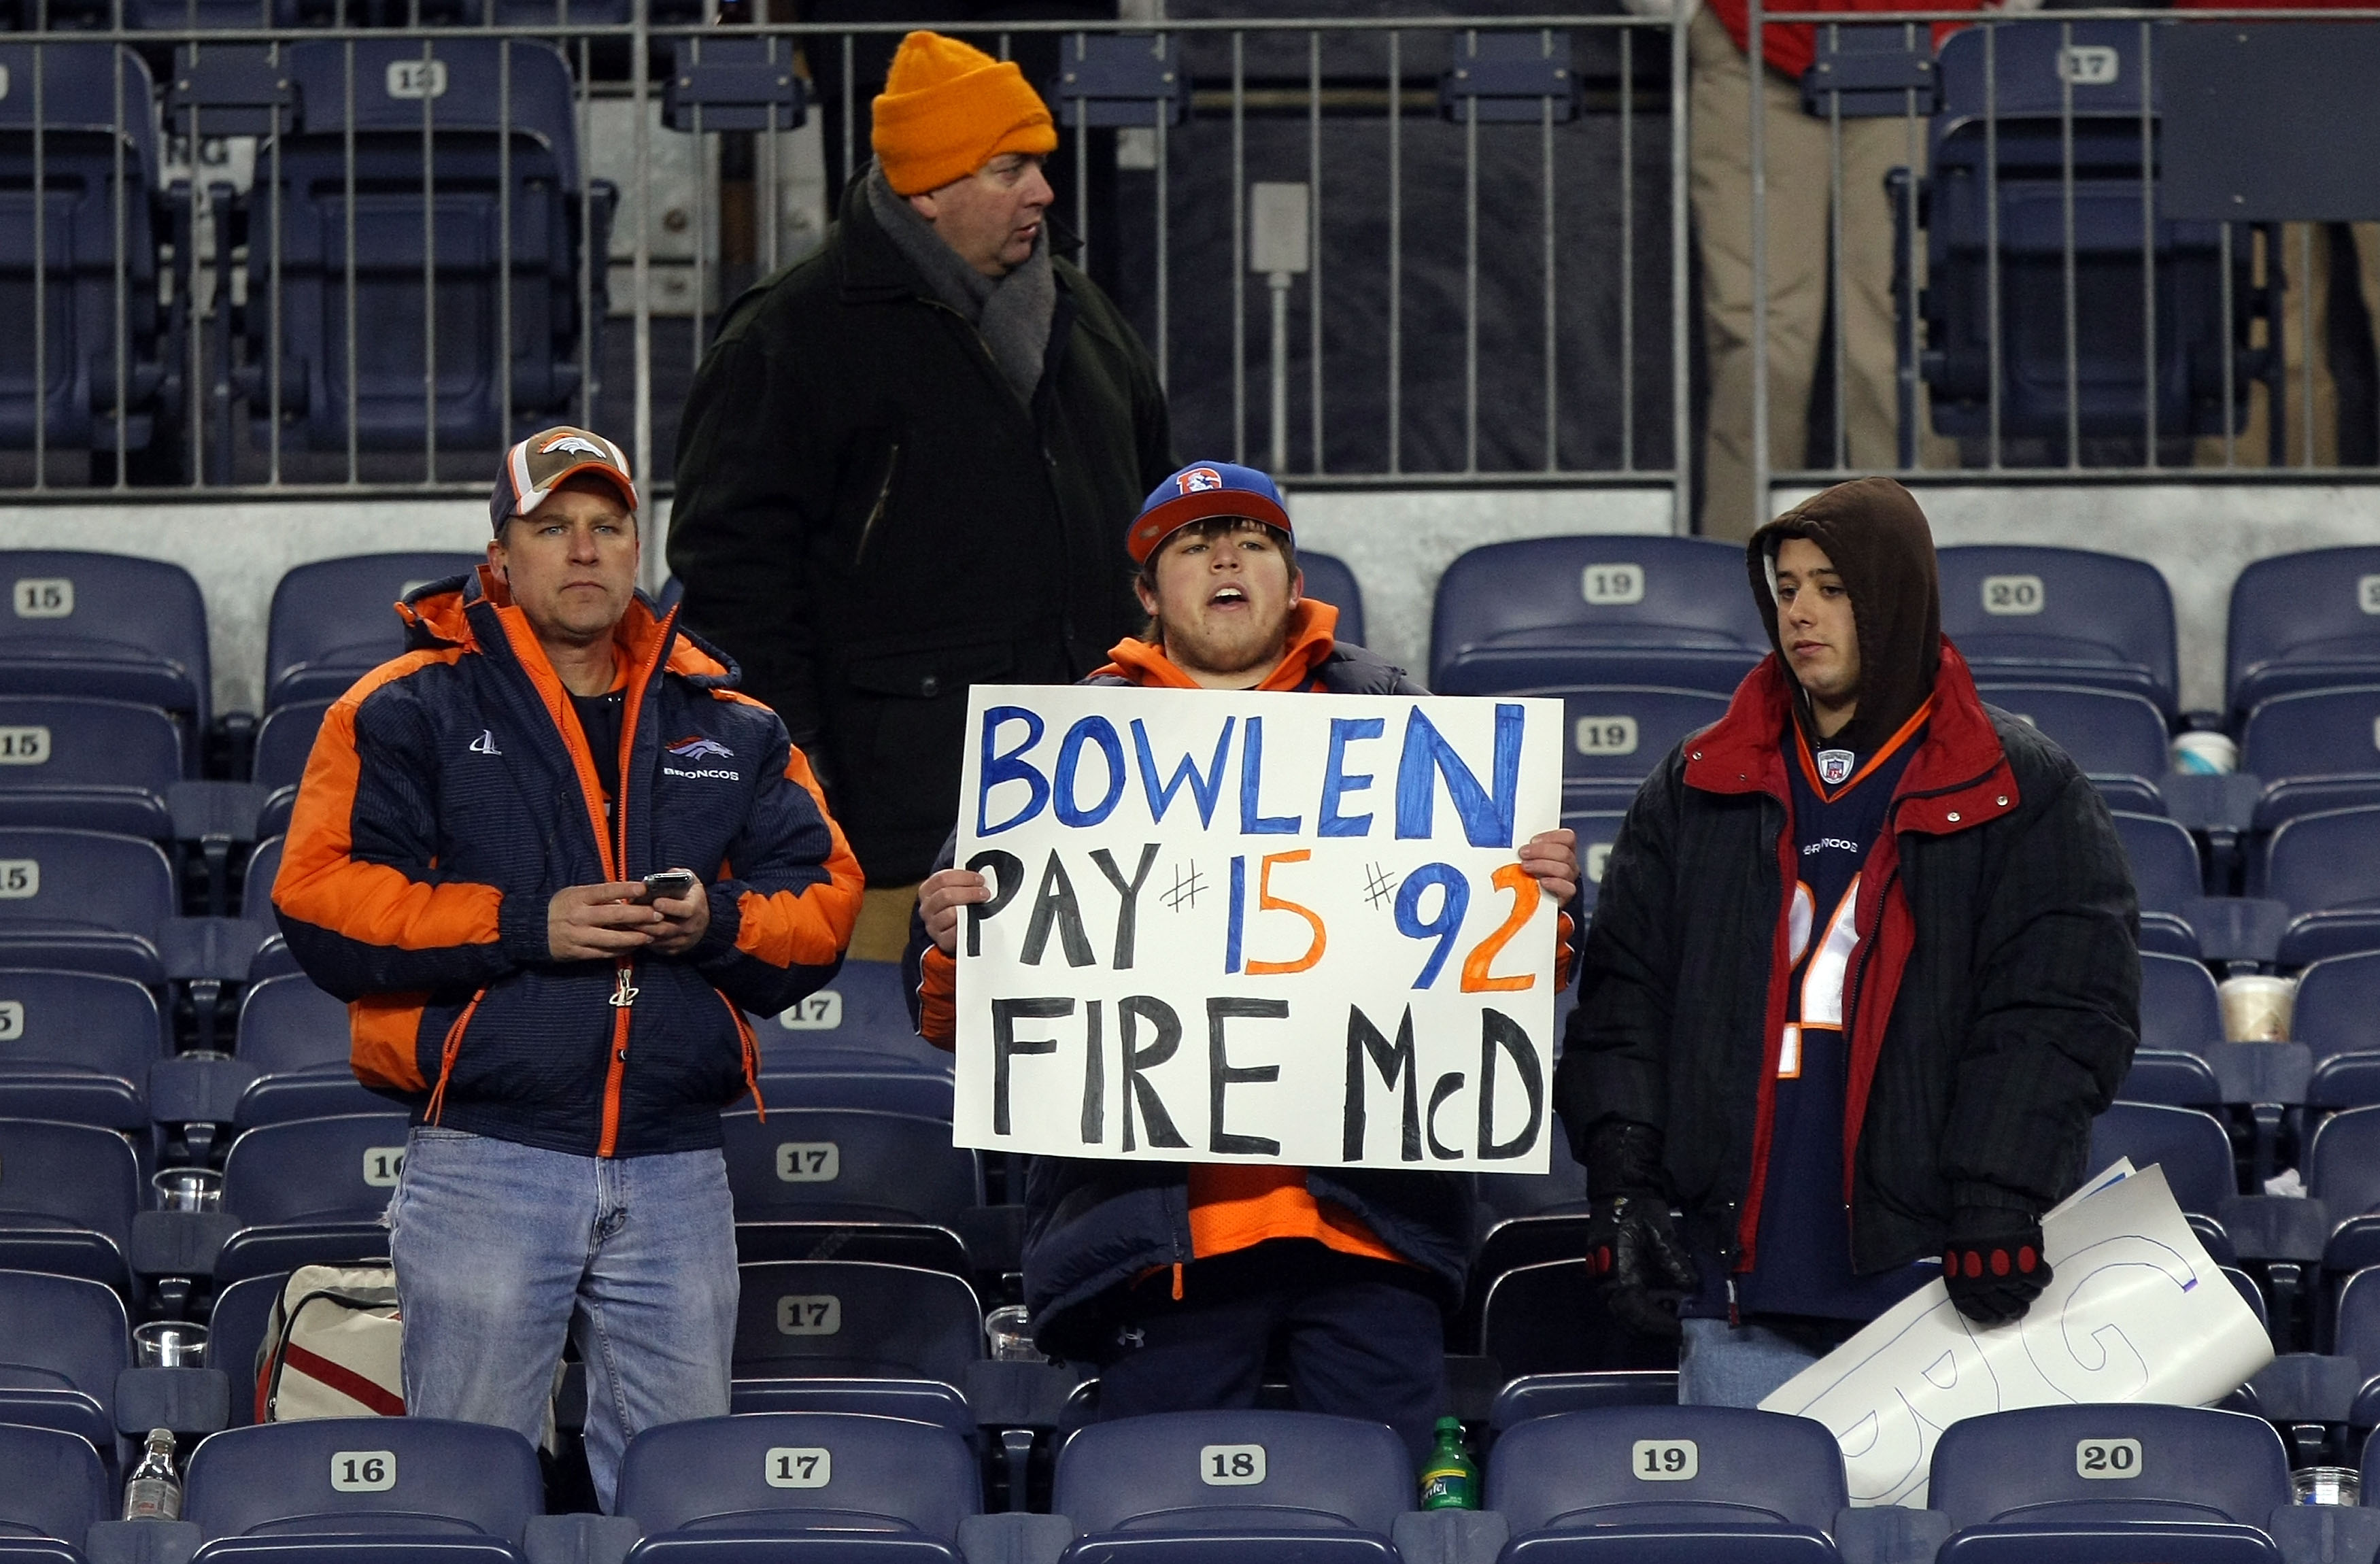 DENVER - JANUARY 03: A Broncos fan holds a sign expressing his sentiments about head coach Josh McDaniels of the Denver Broncos as the Broncos were defeated by the Kansas City Chiefs at Invesco Field at Mile High on January 3, 2010 in Denver, Colorado. (P